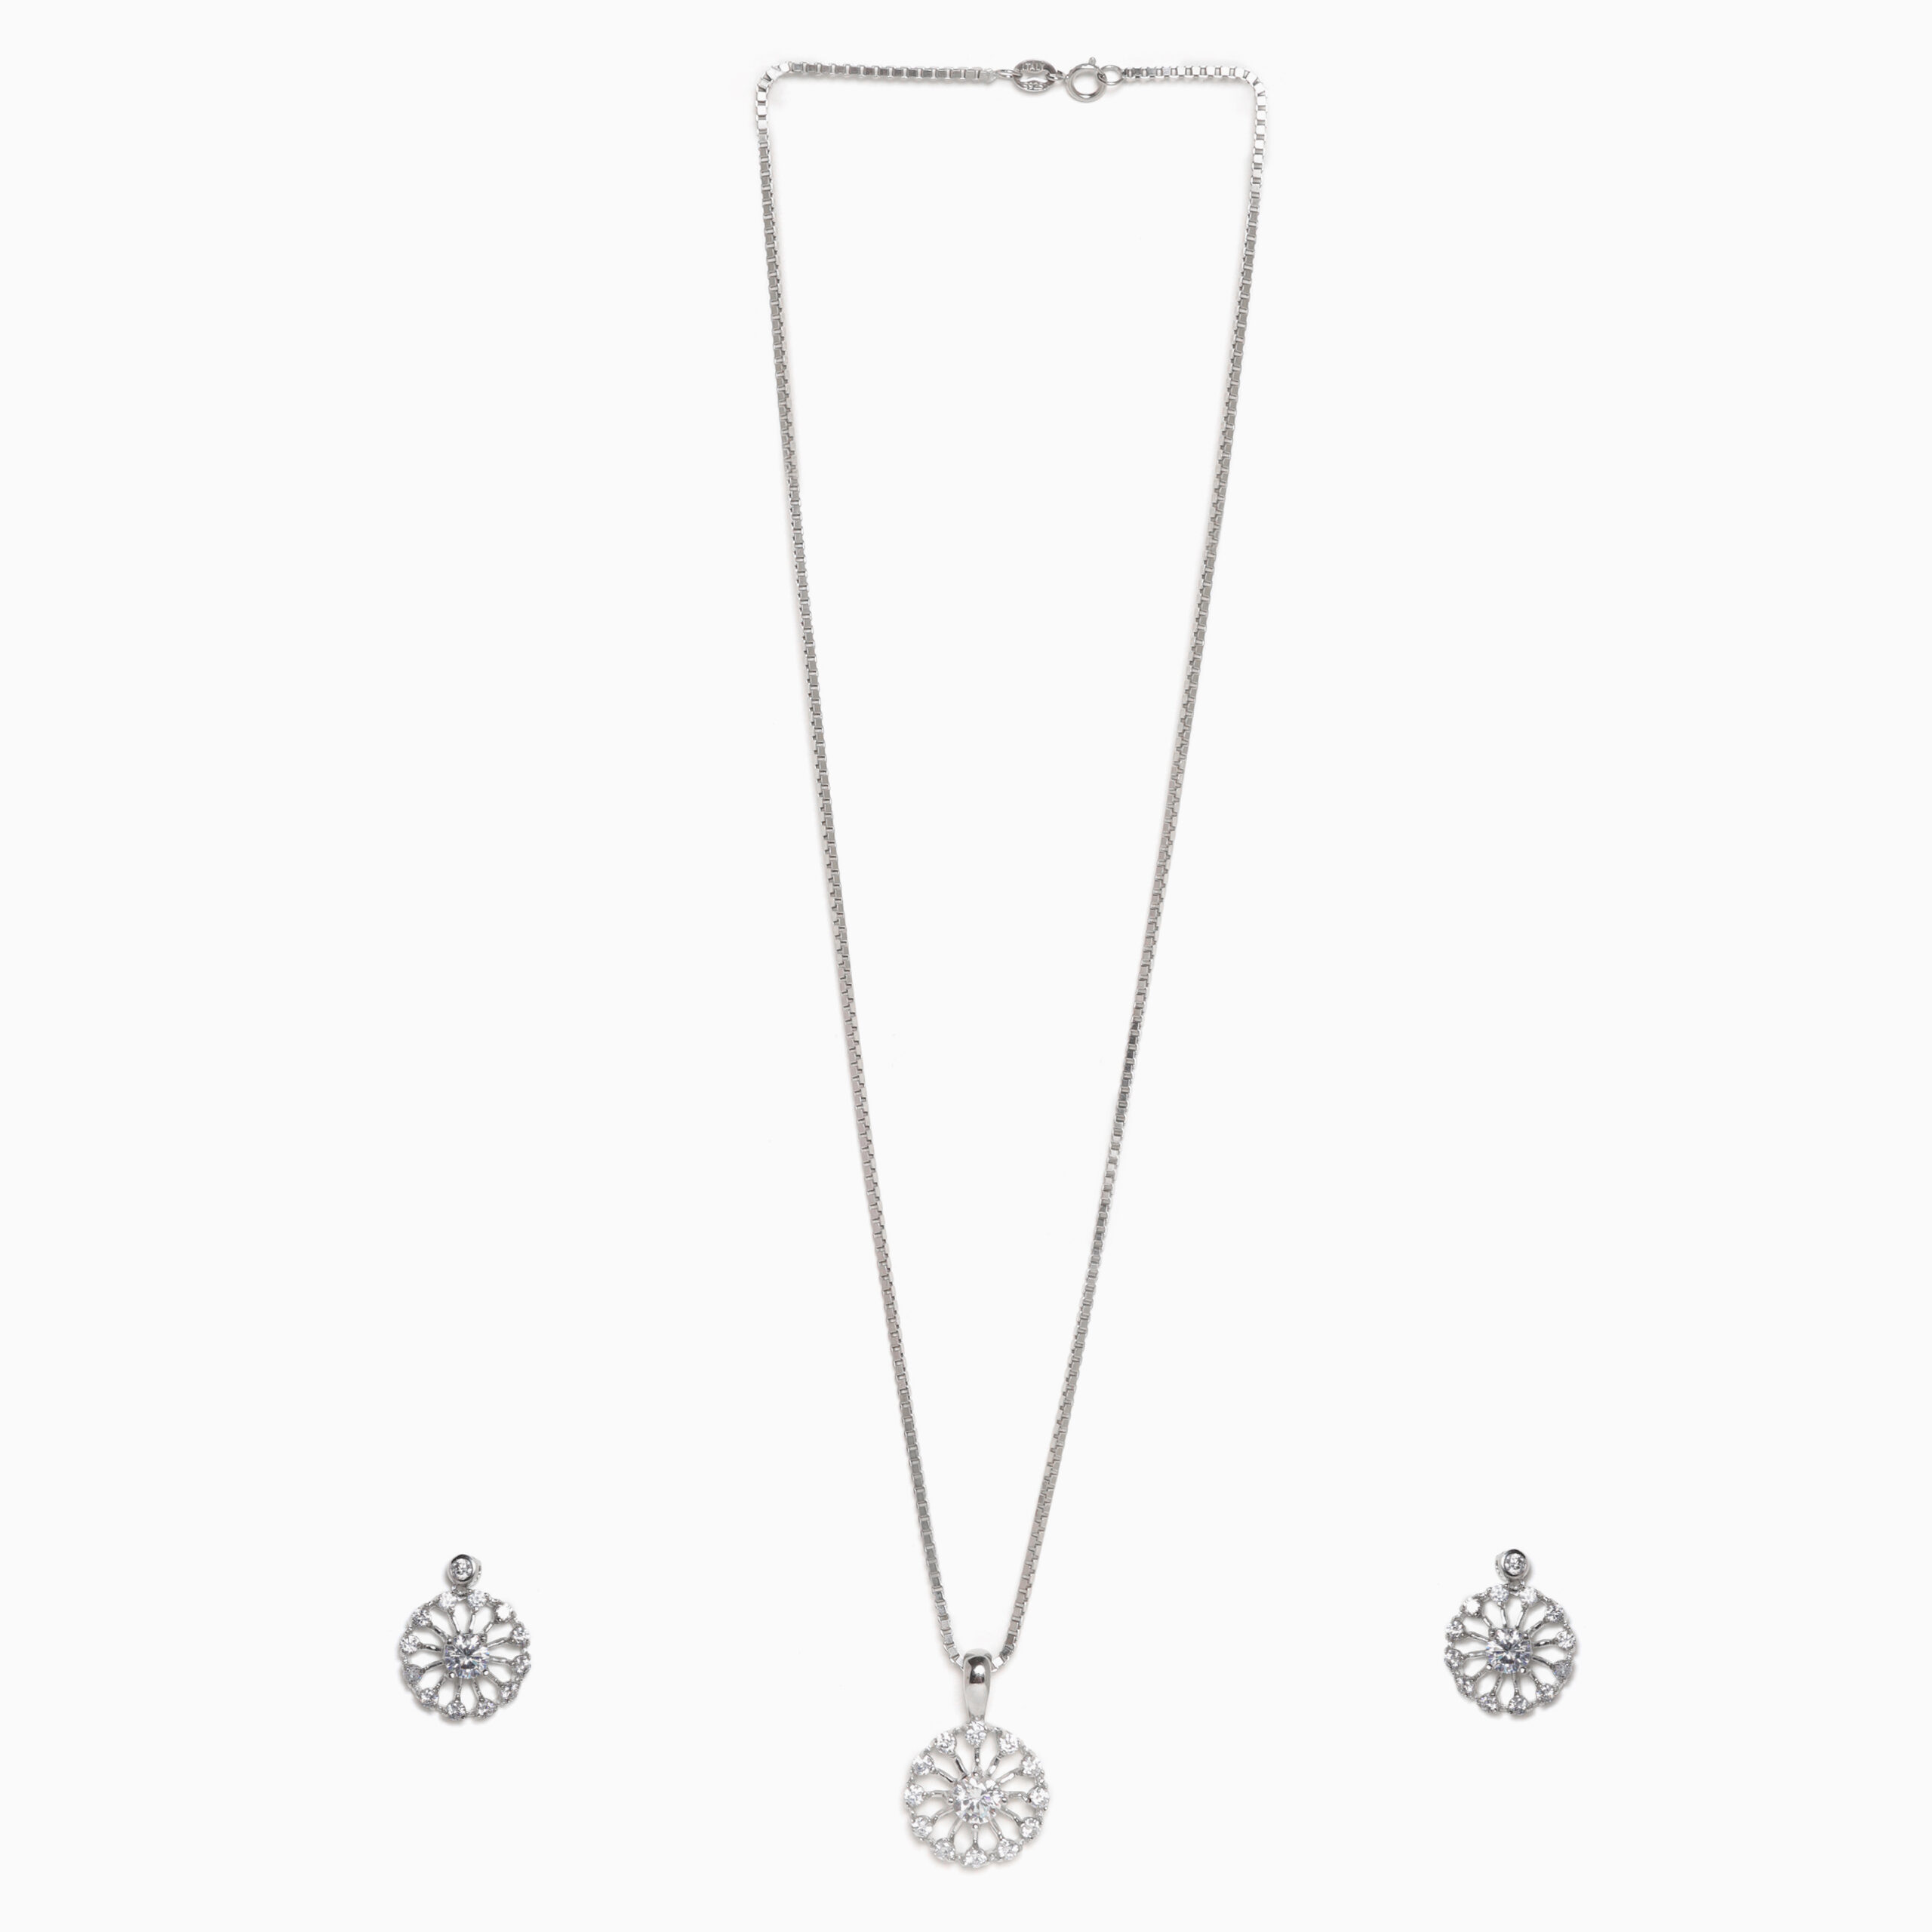 Silk 'Elegance Personified' Pendant Set With Earrings